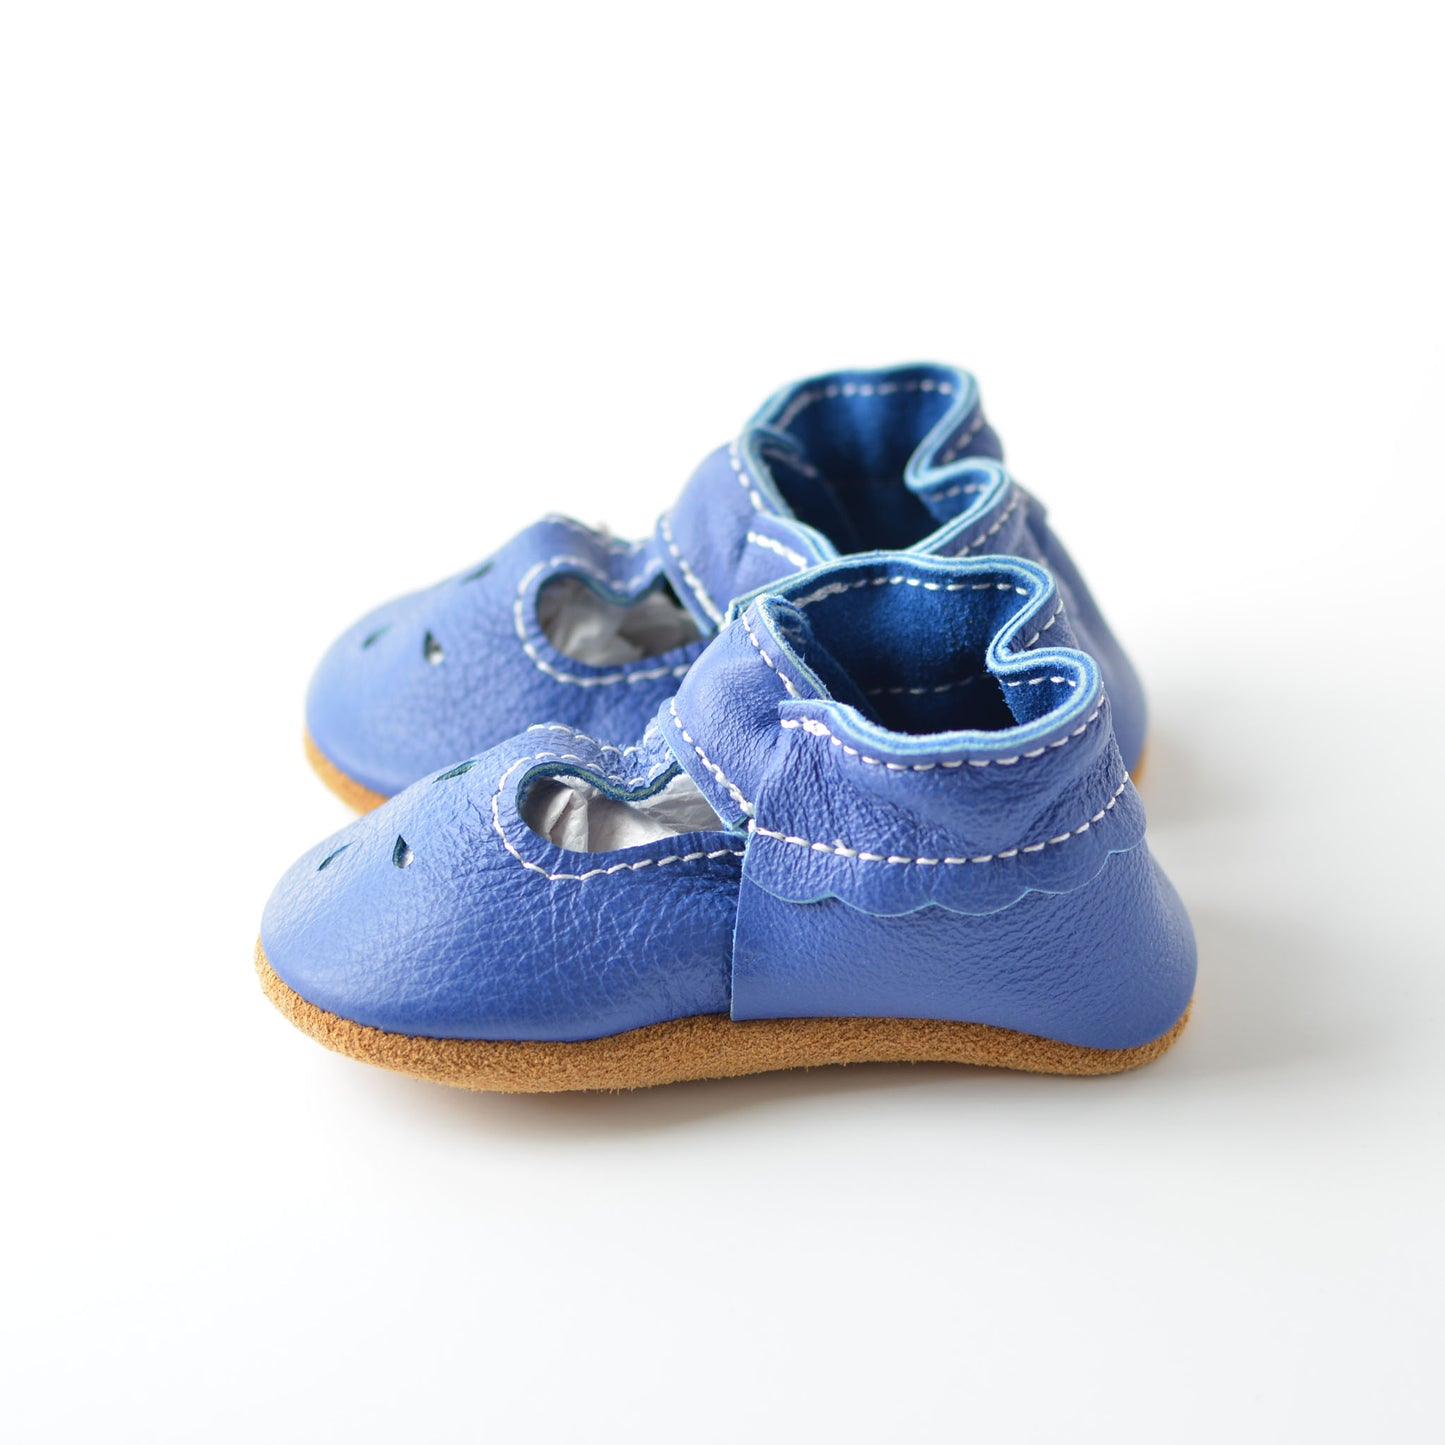 RTS Maliblue T-straps With Tan Suede Leather Soles - Size 3 (12-18M)(5")